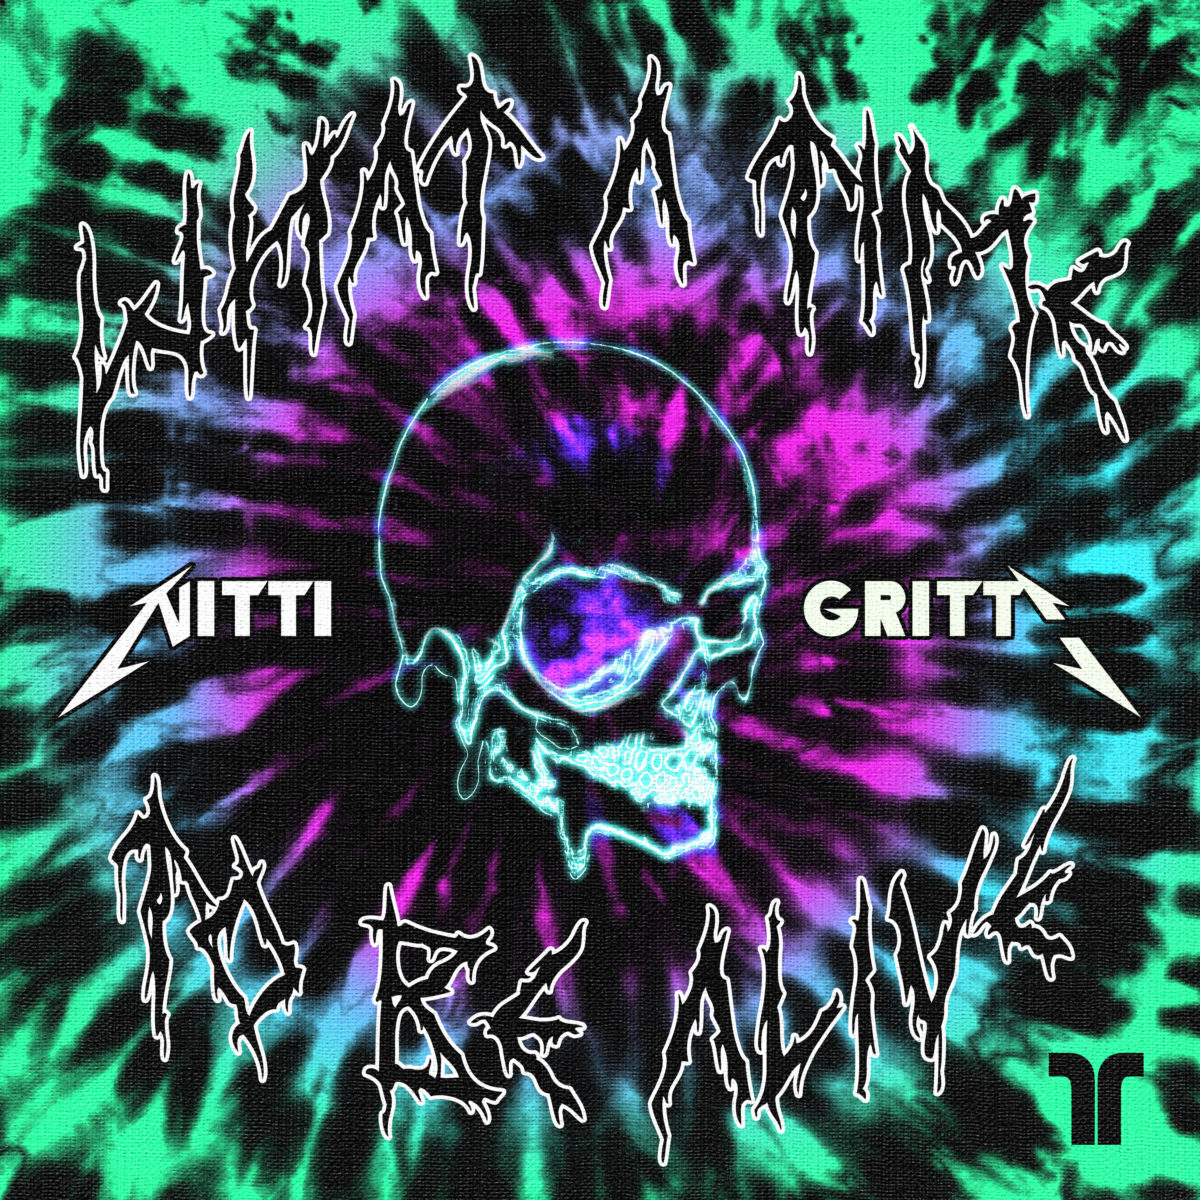 Nitti Gritti Drops New "What A Time To Be Alive" EP With Shaq, Ookay, FuntCase & More | Your EDM